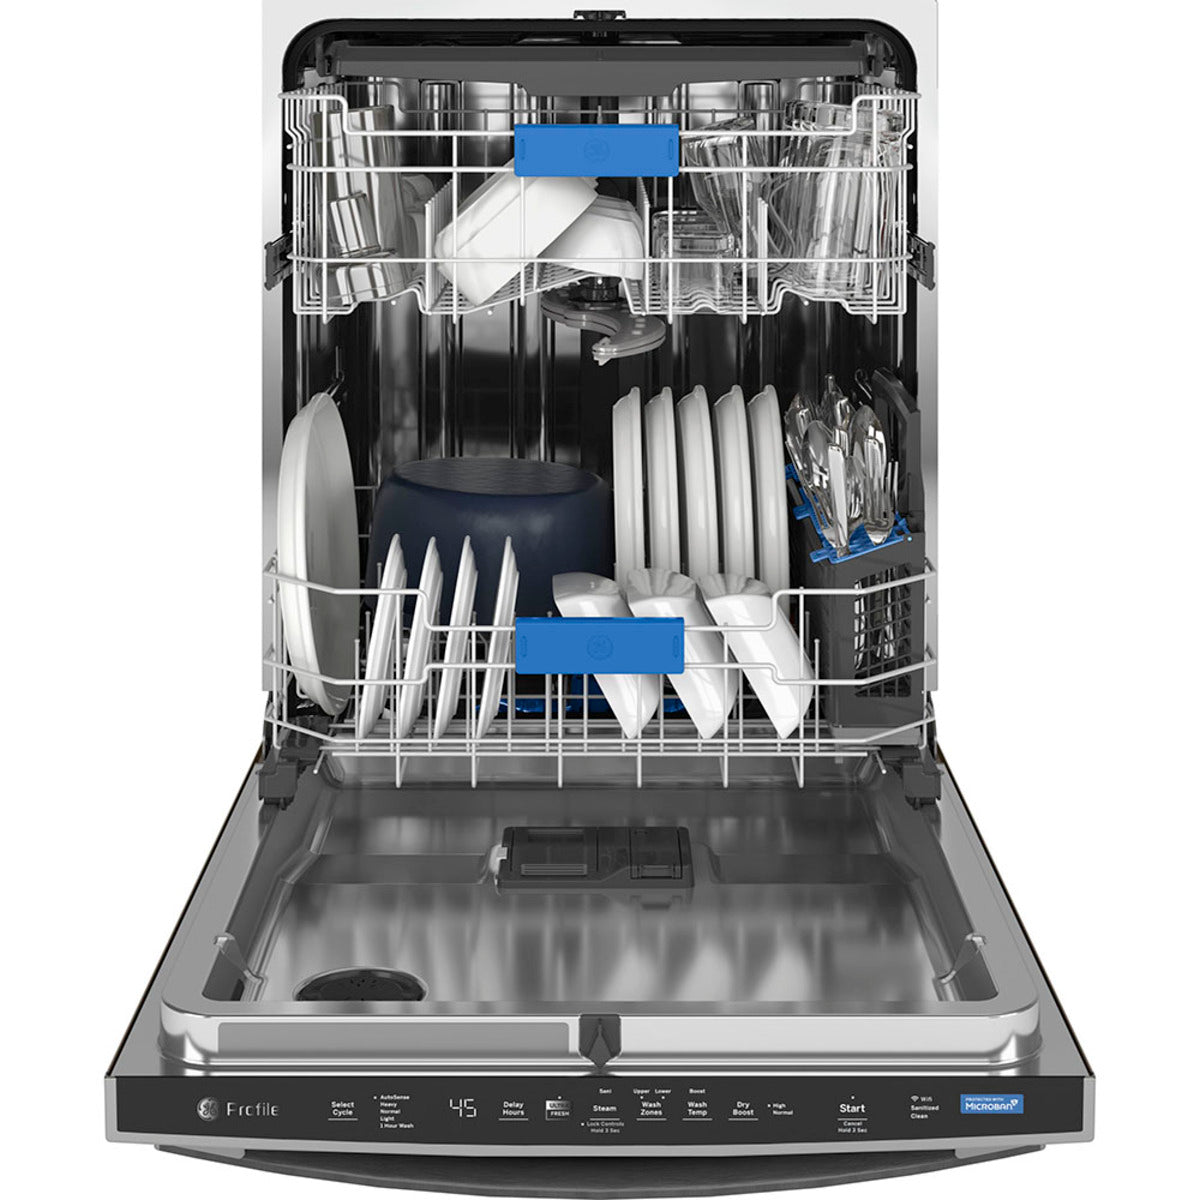 GE Profile - 45 dBA Built In Dishwasher in Grey - PBT865SMPES